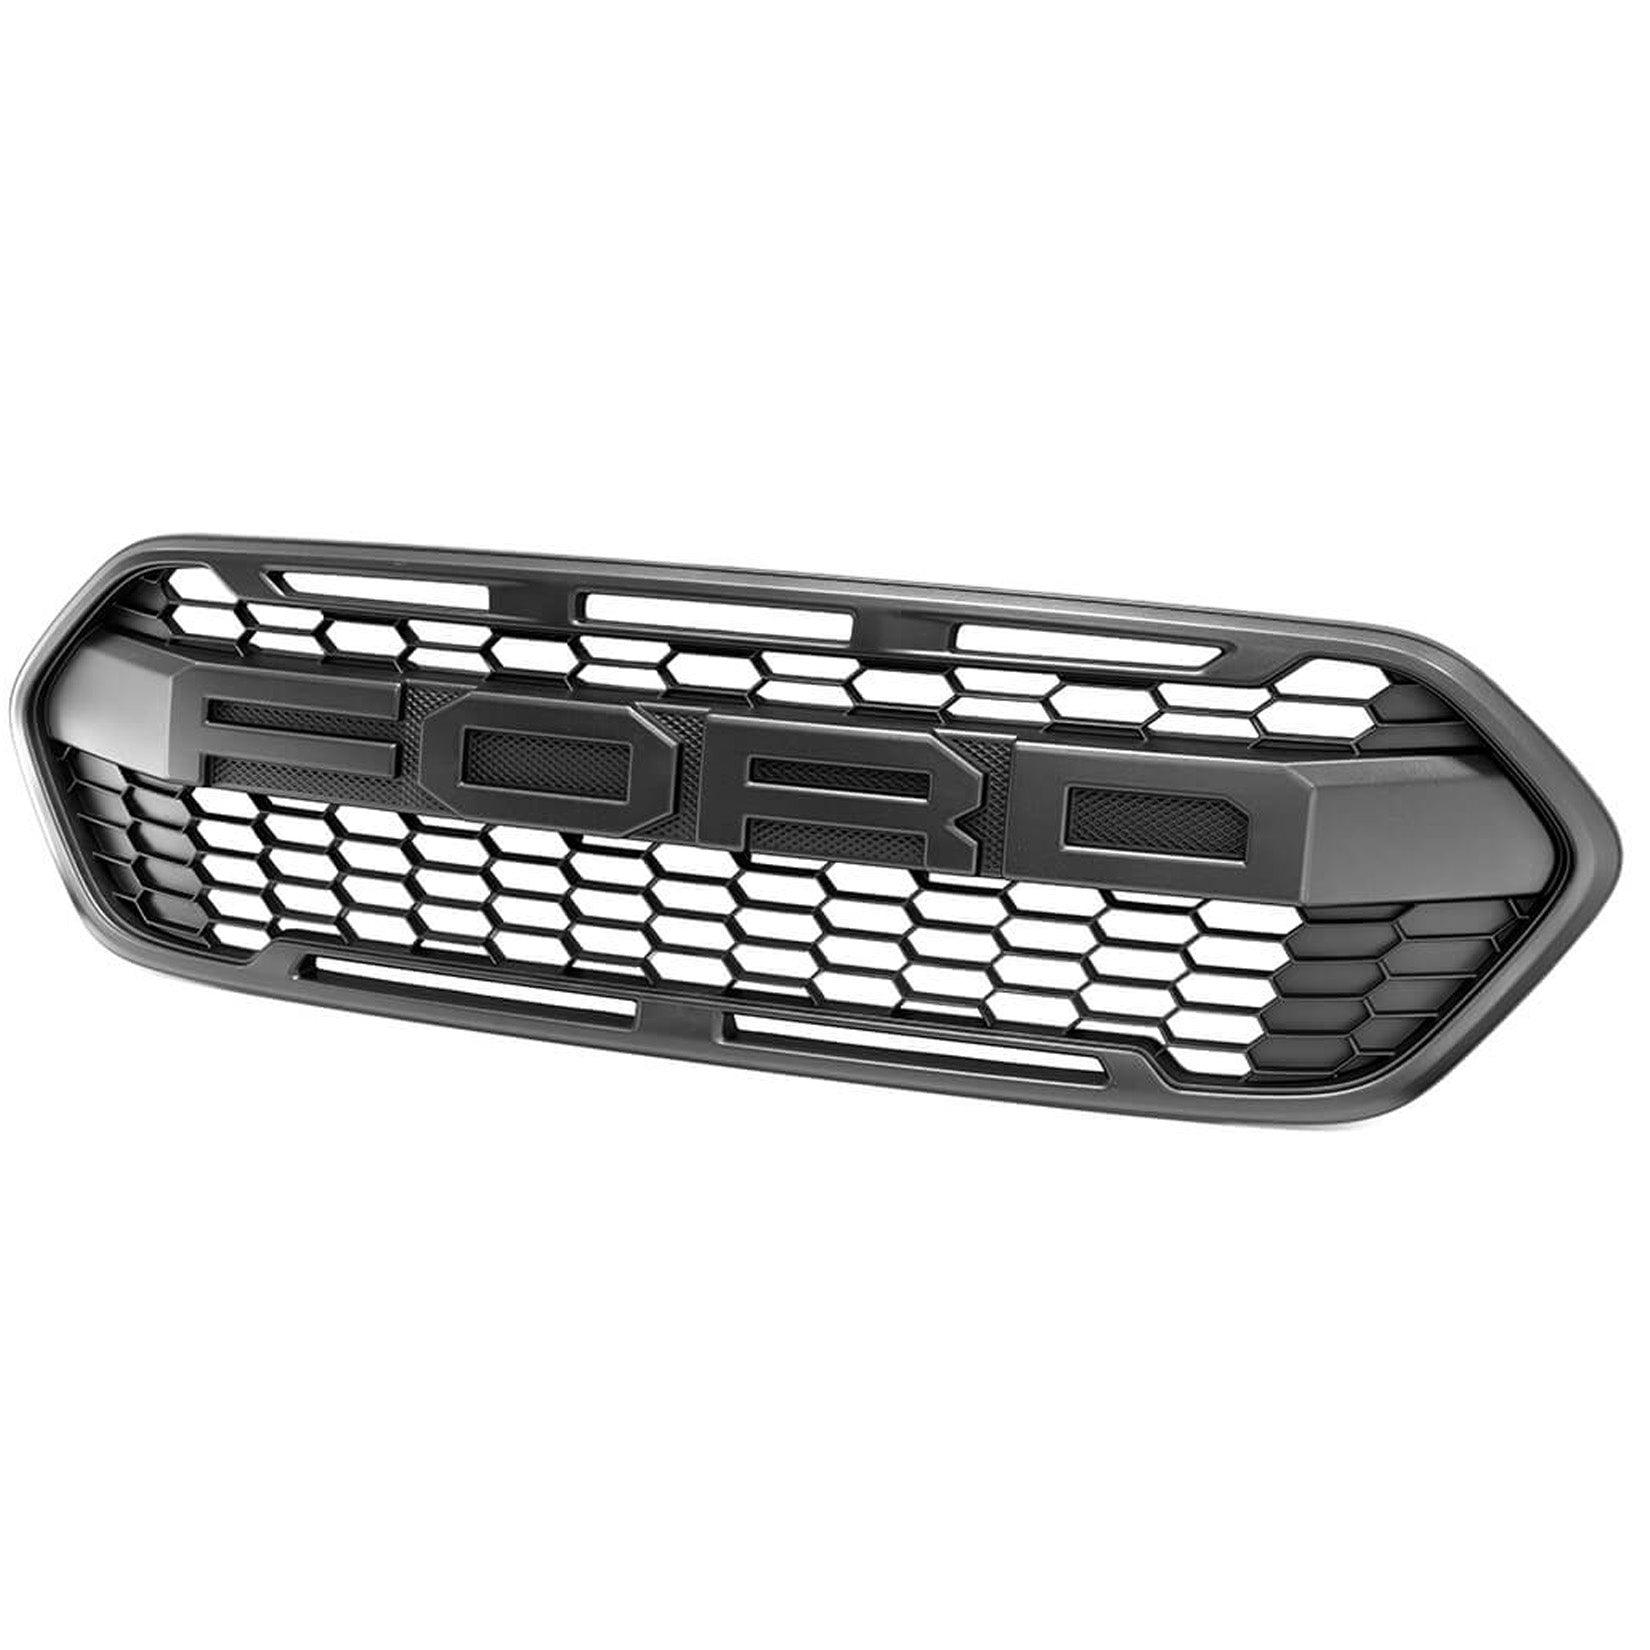 FORD TRANSIT CUSTOM 2018 ON – GENUINE FRONT RAPTOR STYLE GRILLE - RisperStyling